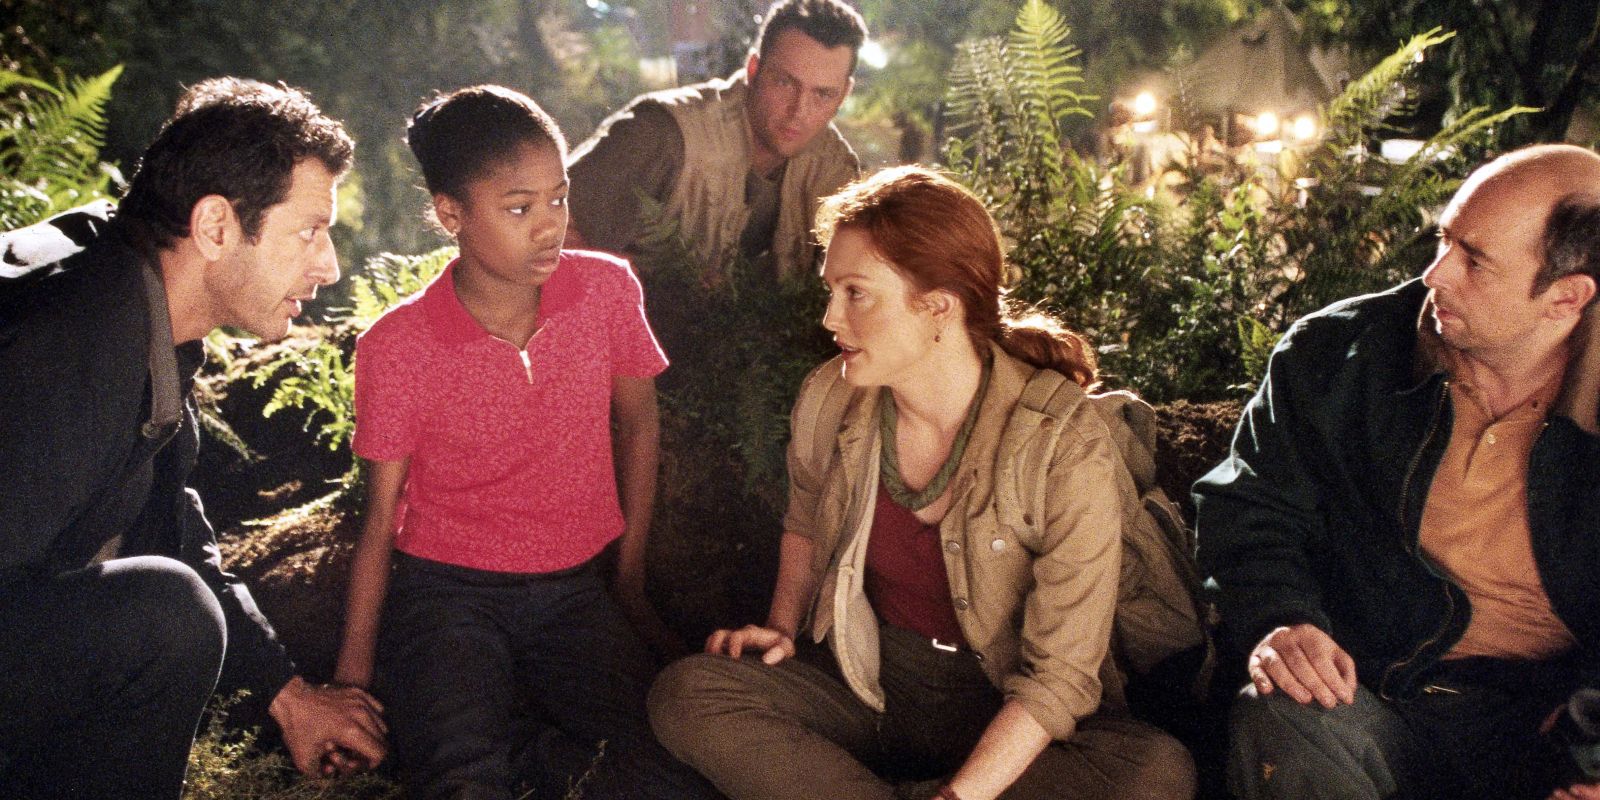 Kelly Malcolm talks with the others at the camp site in The Lost World